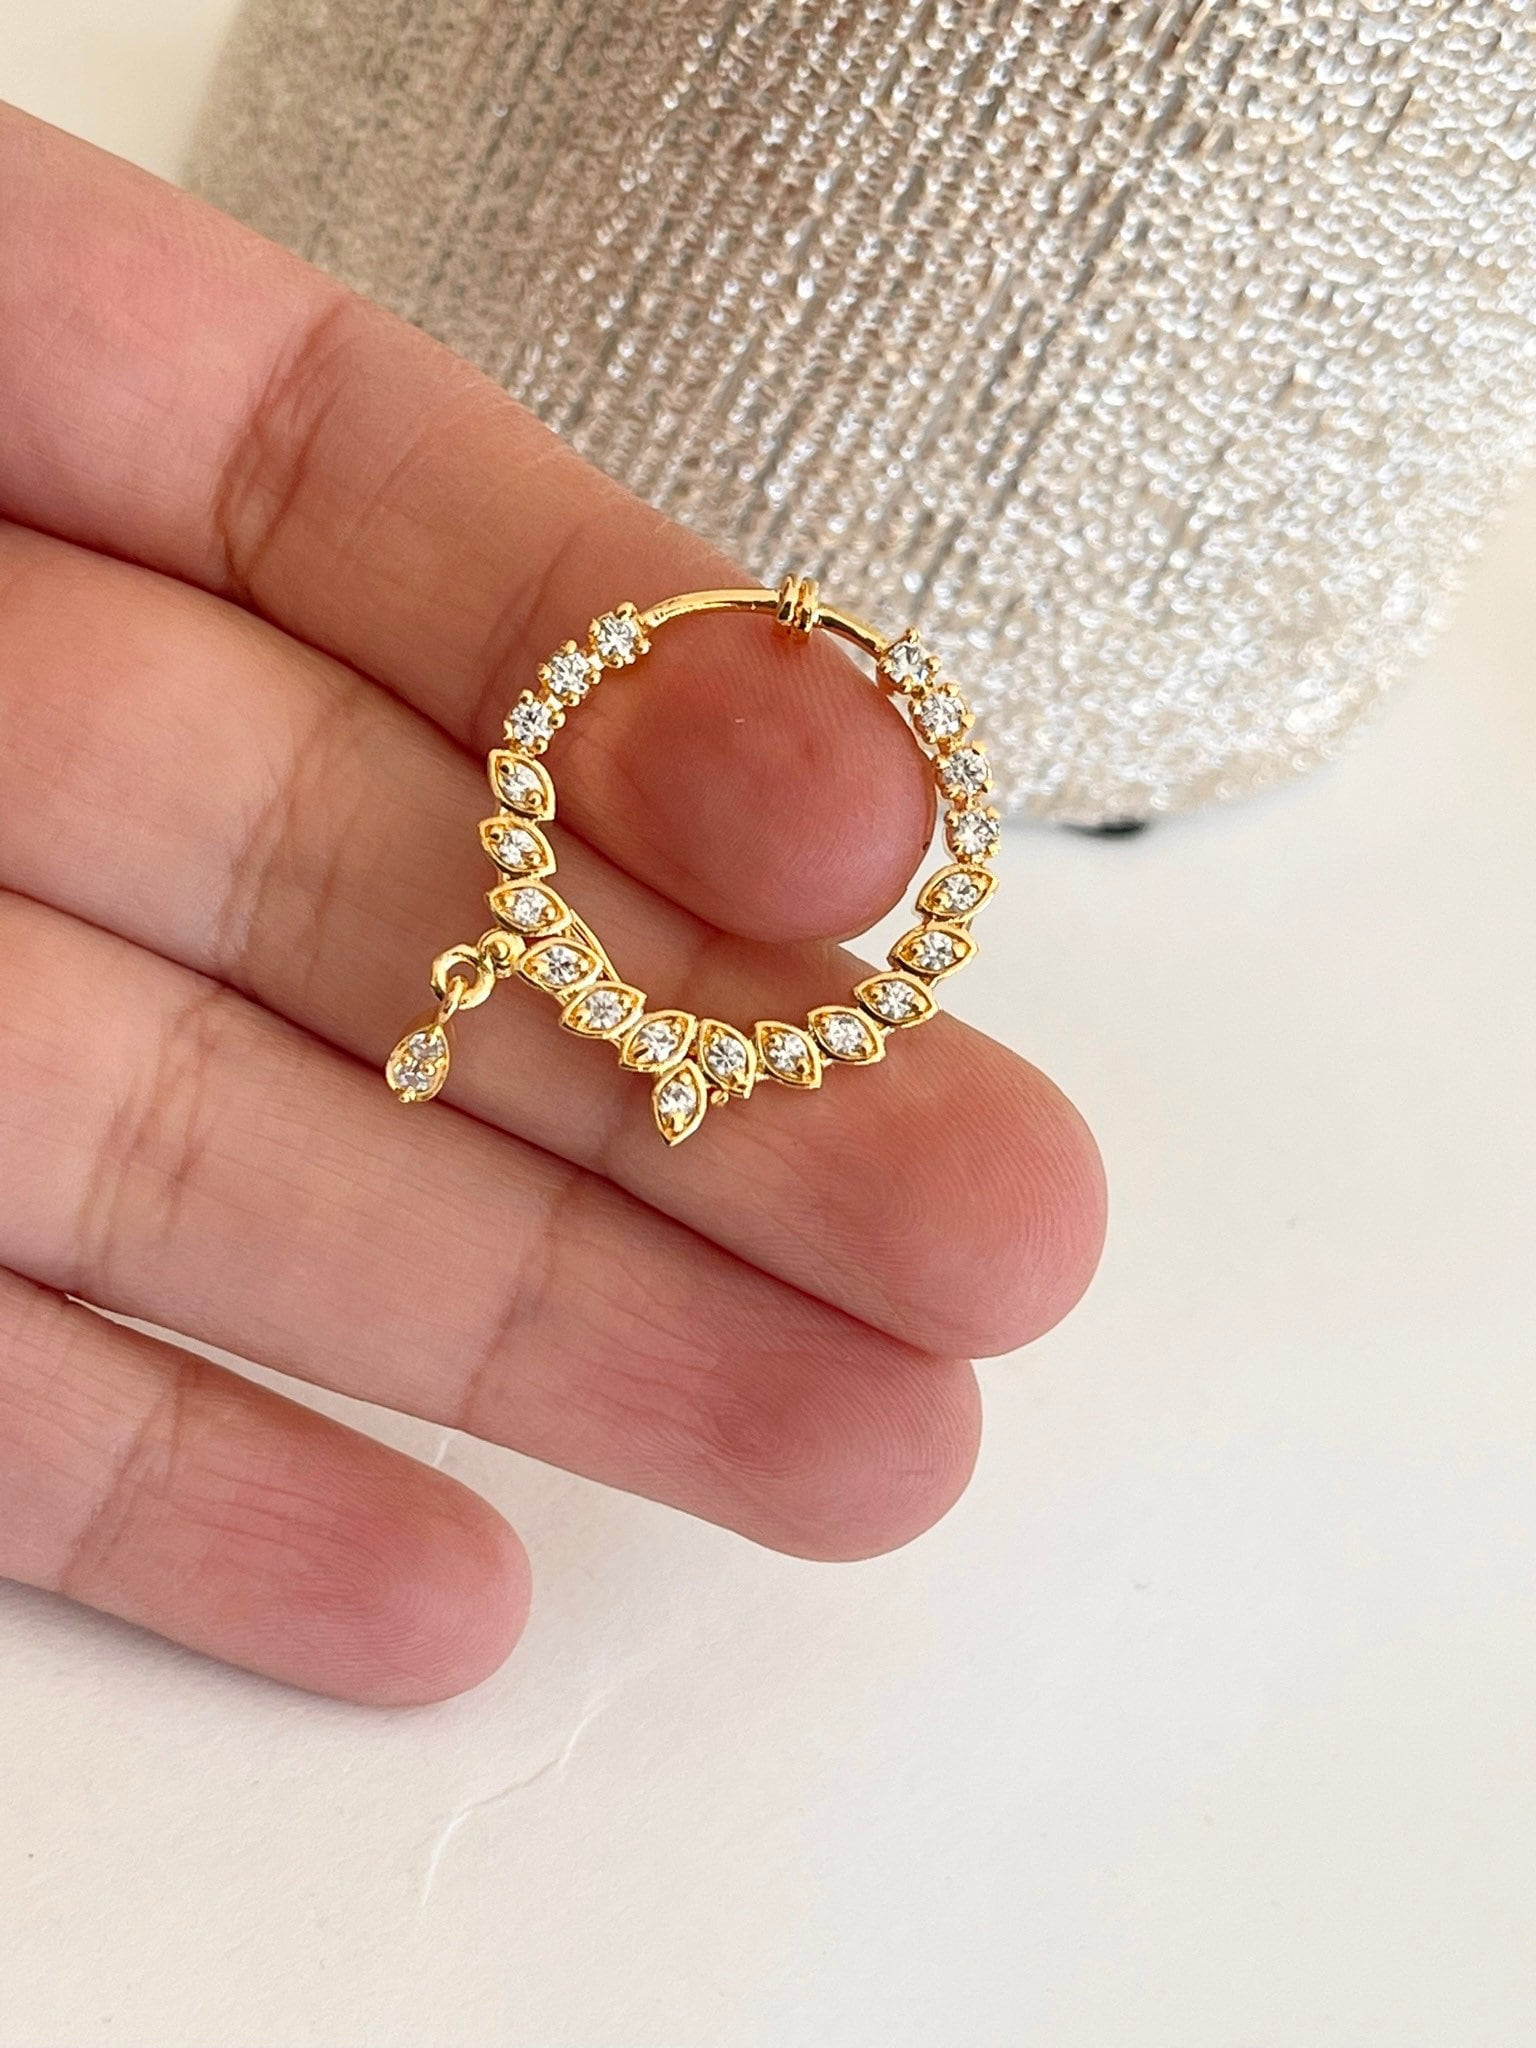 Bridal Gold Small Wedding 0.6 inch Nose Ring Chain Nepal | Ubuy